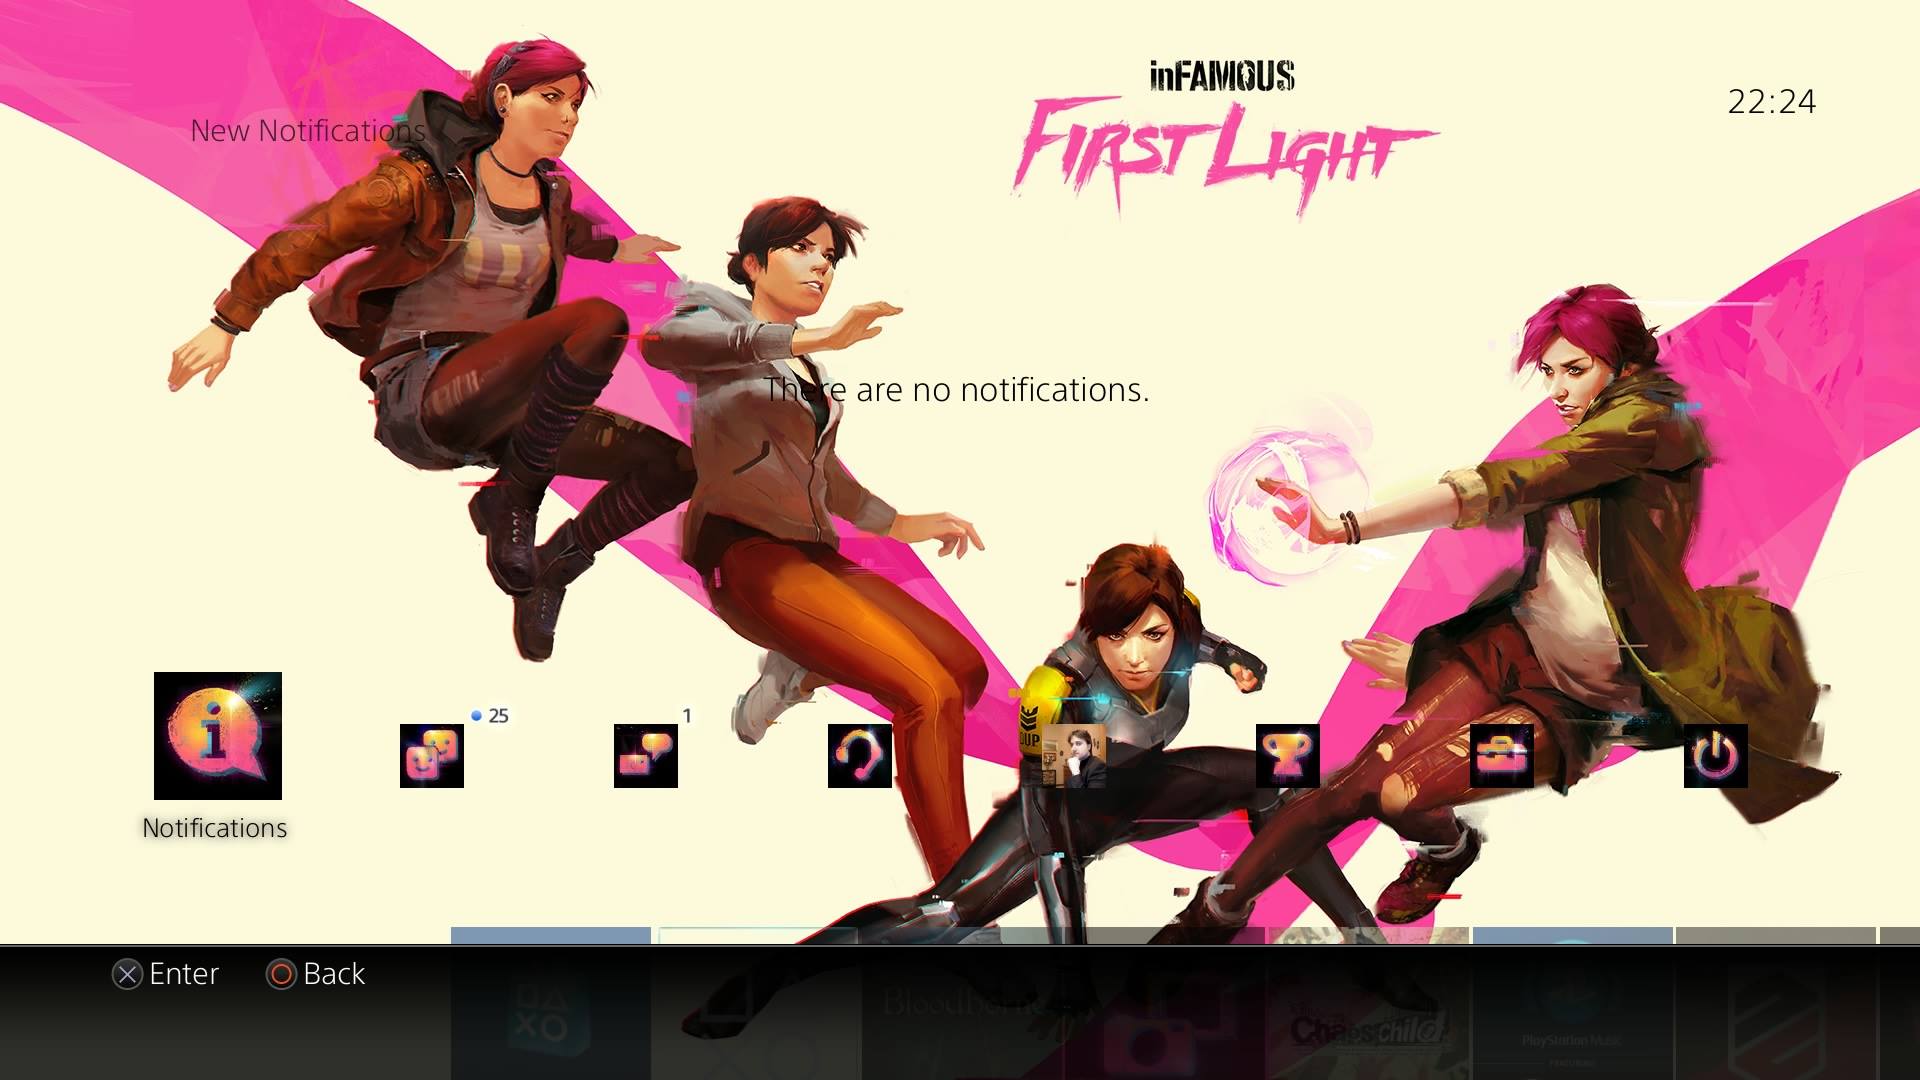 infamous first light second son